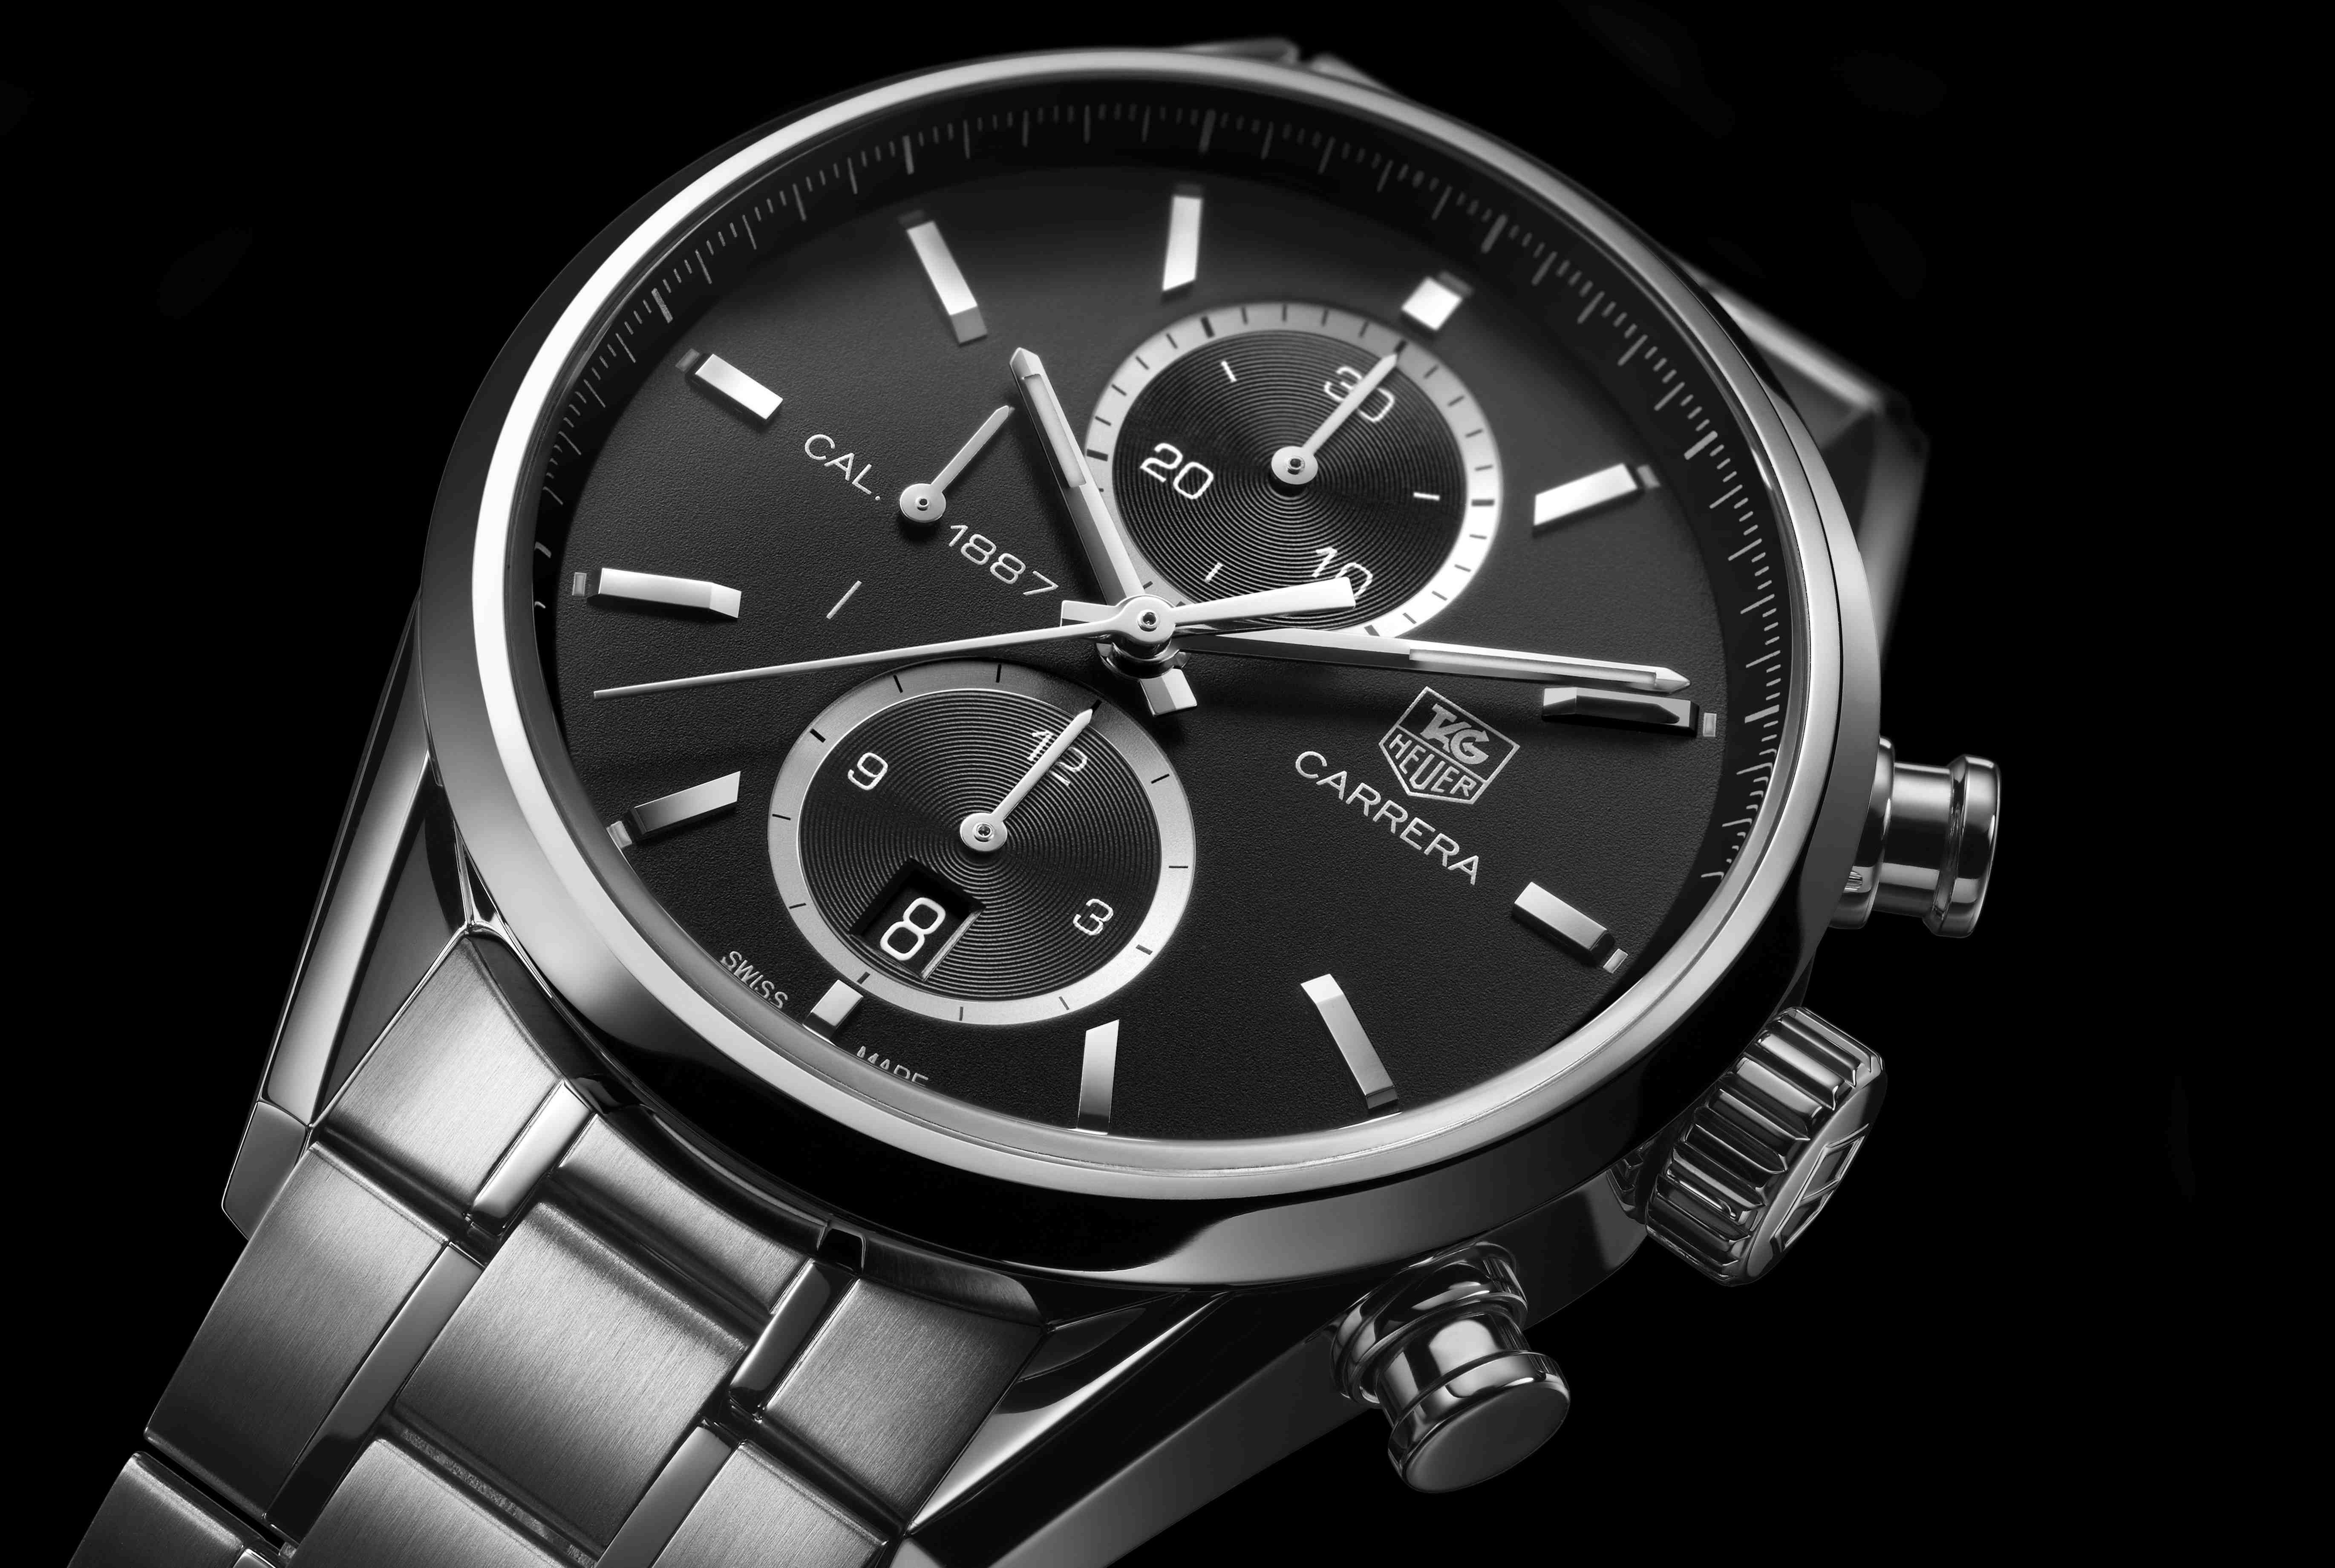 tag heuer smartwatch price release date and battery life revealed image 1